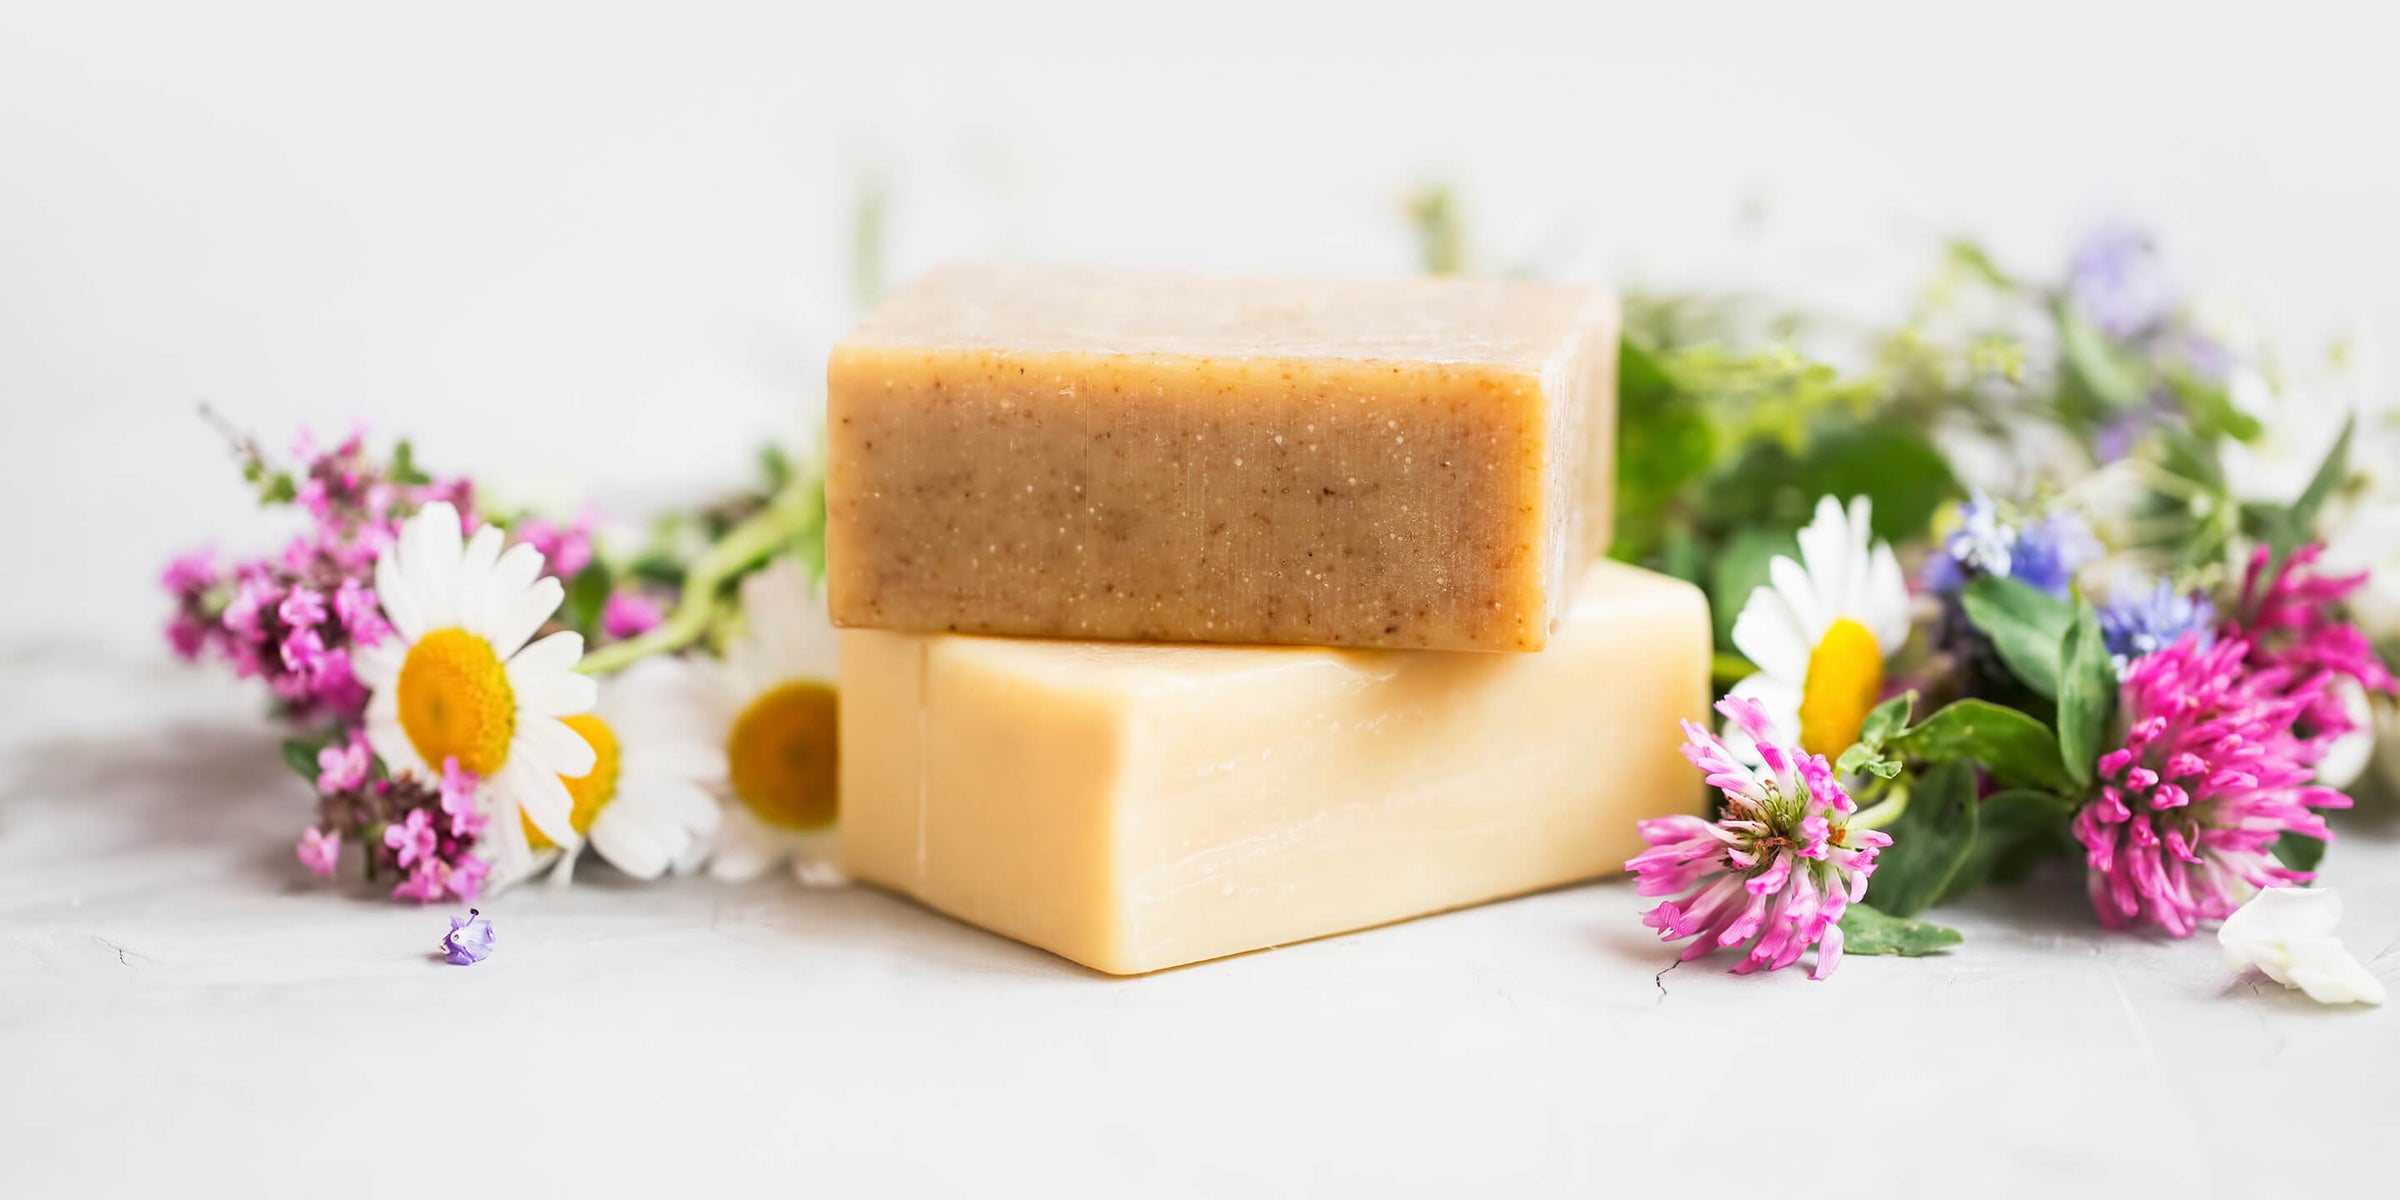 bars of soap with dandelions and flowers